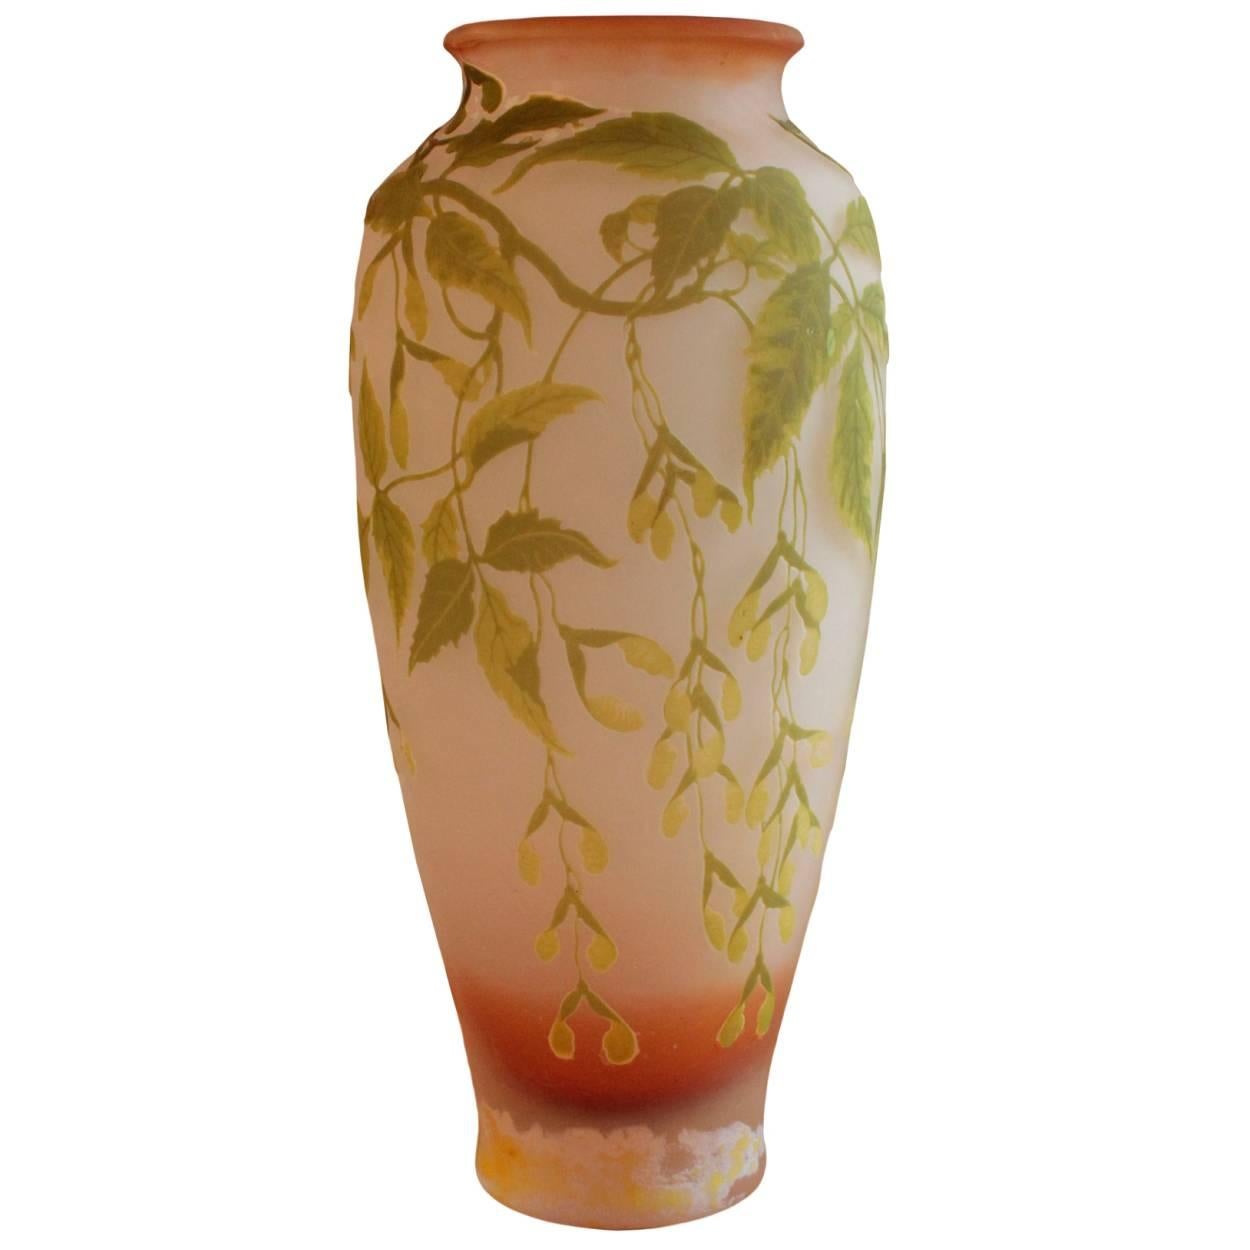 Oversized French Art Nouveau Cameo Vase by Galle For Sale